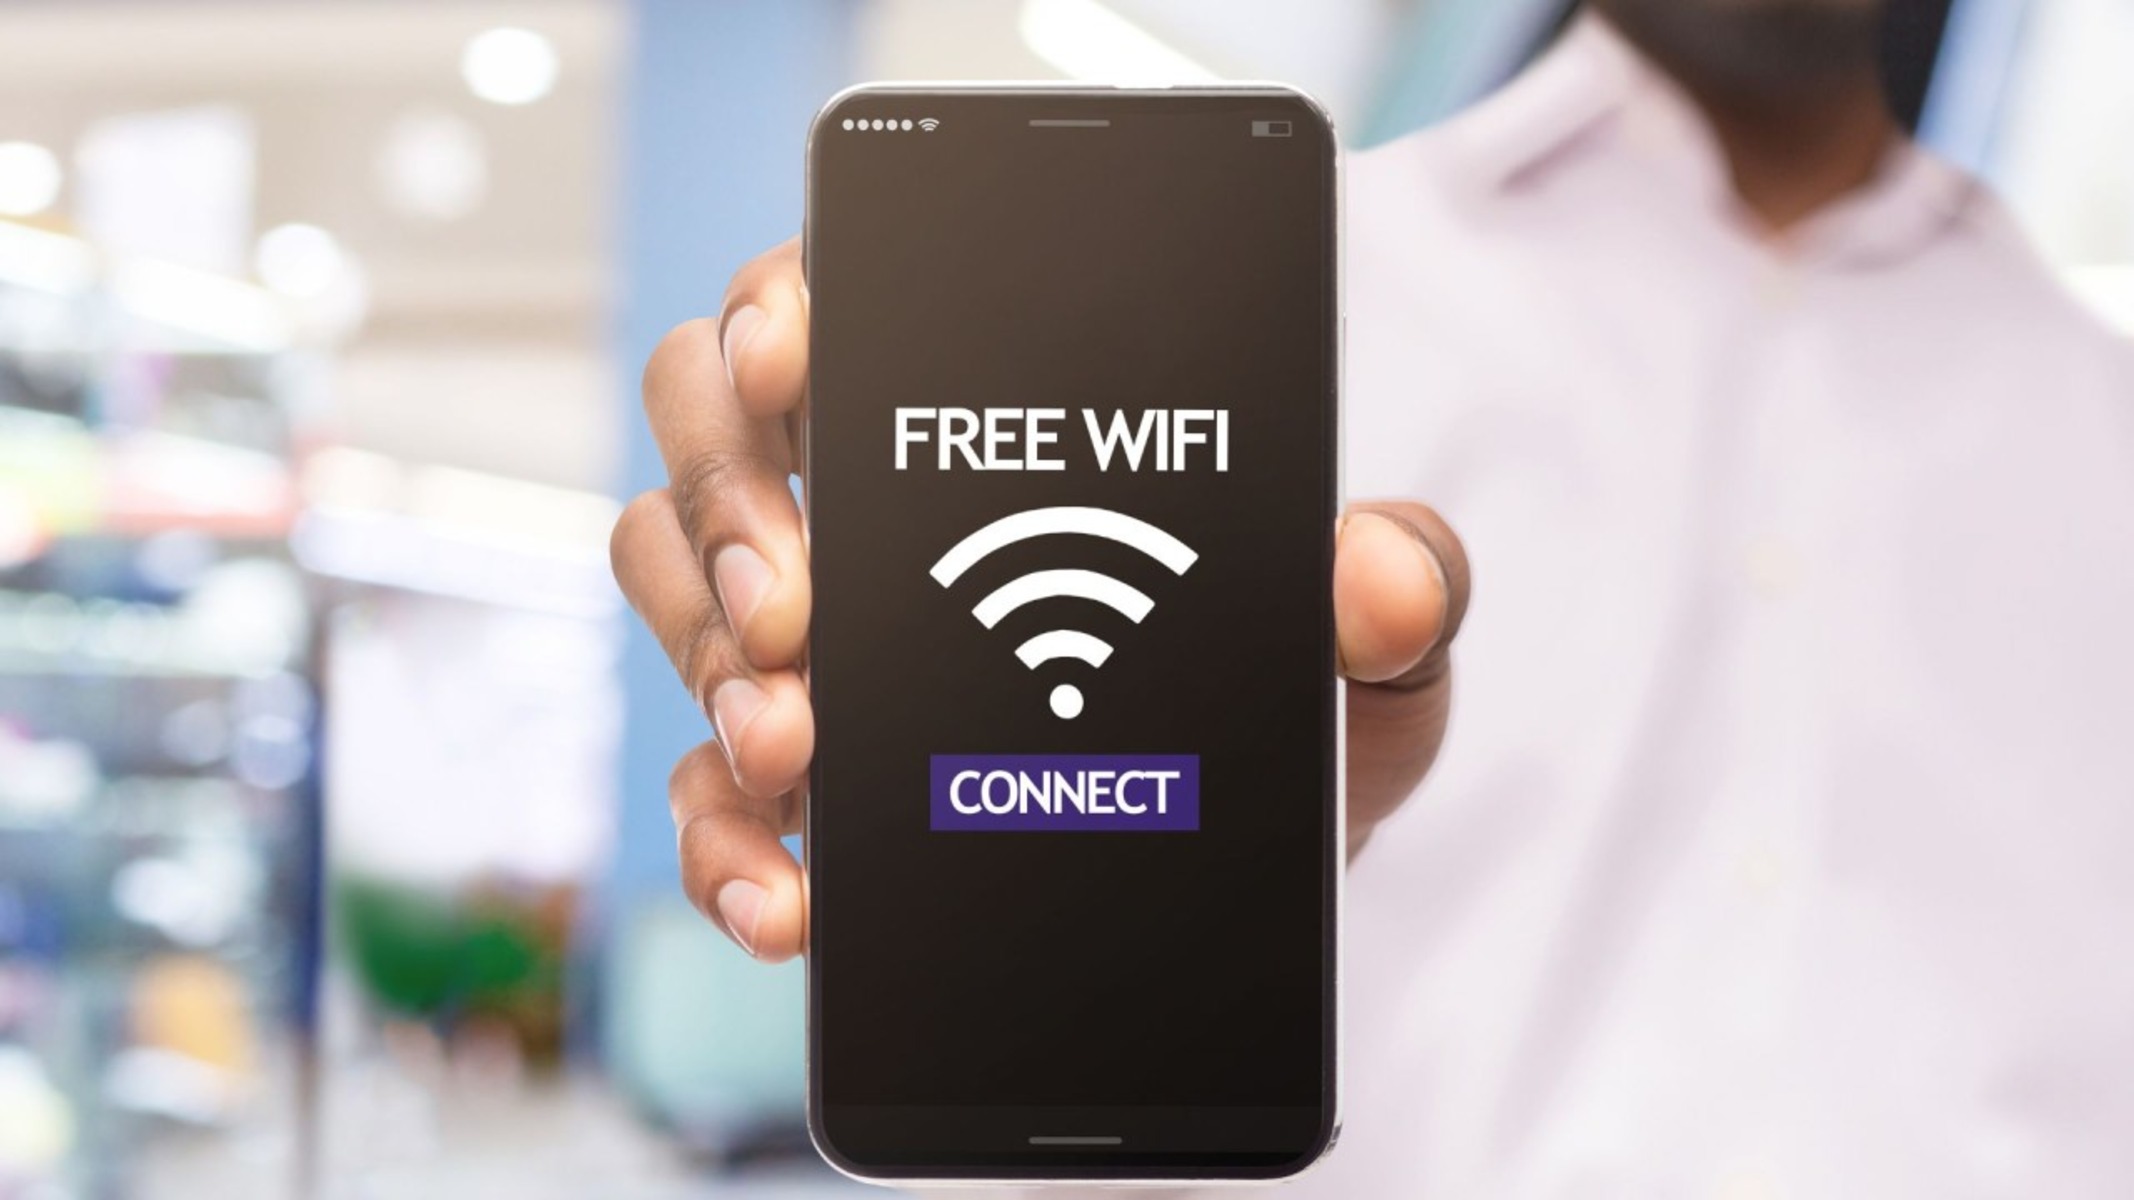 How Does A Smartphone Connect To The Internet